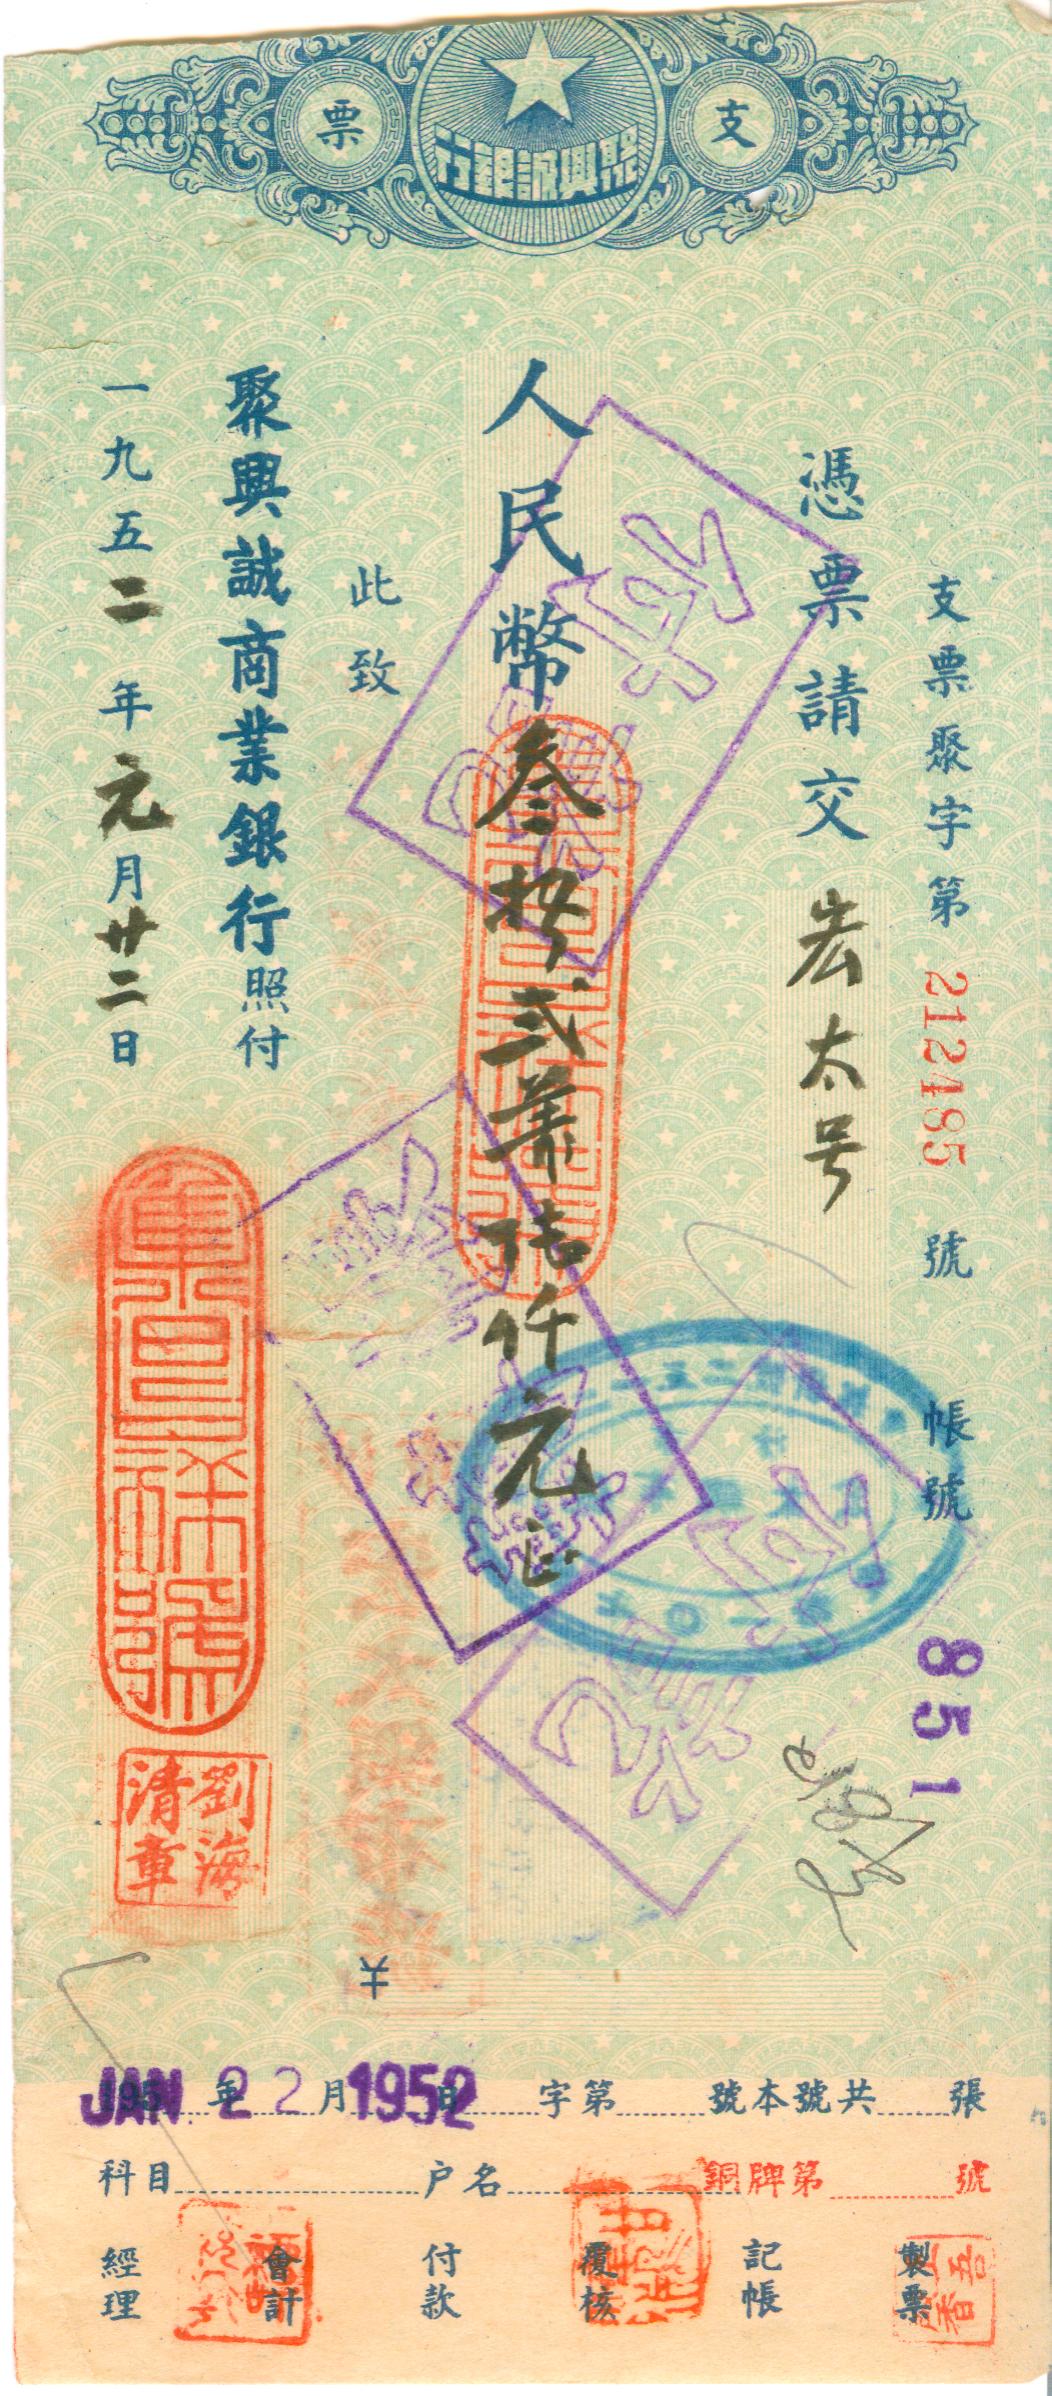 D2214, Check of Young Brothers Banking Corporation, 1952 China